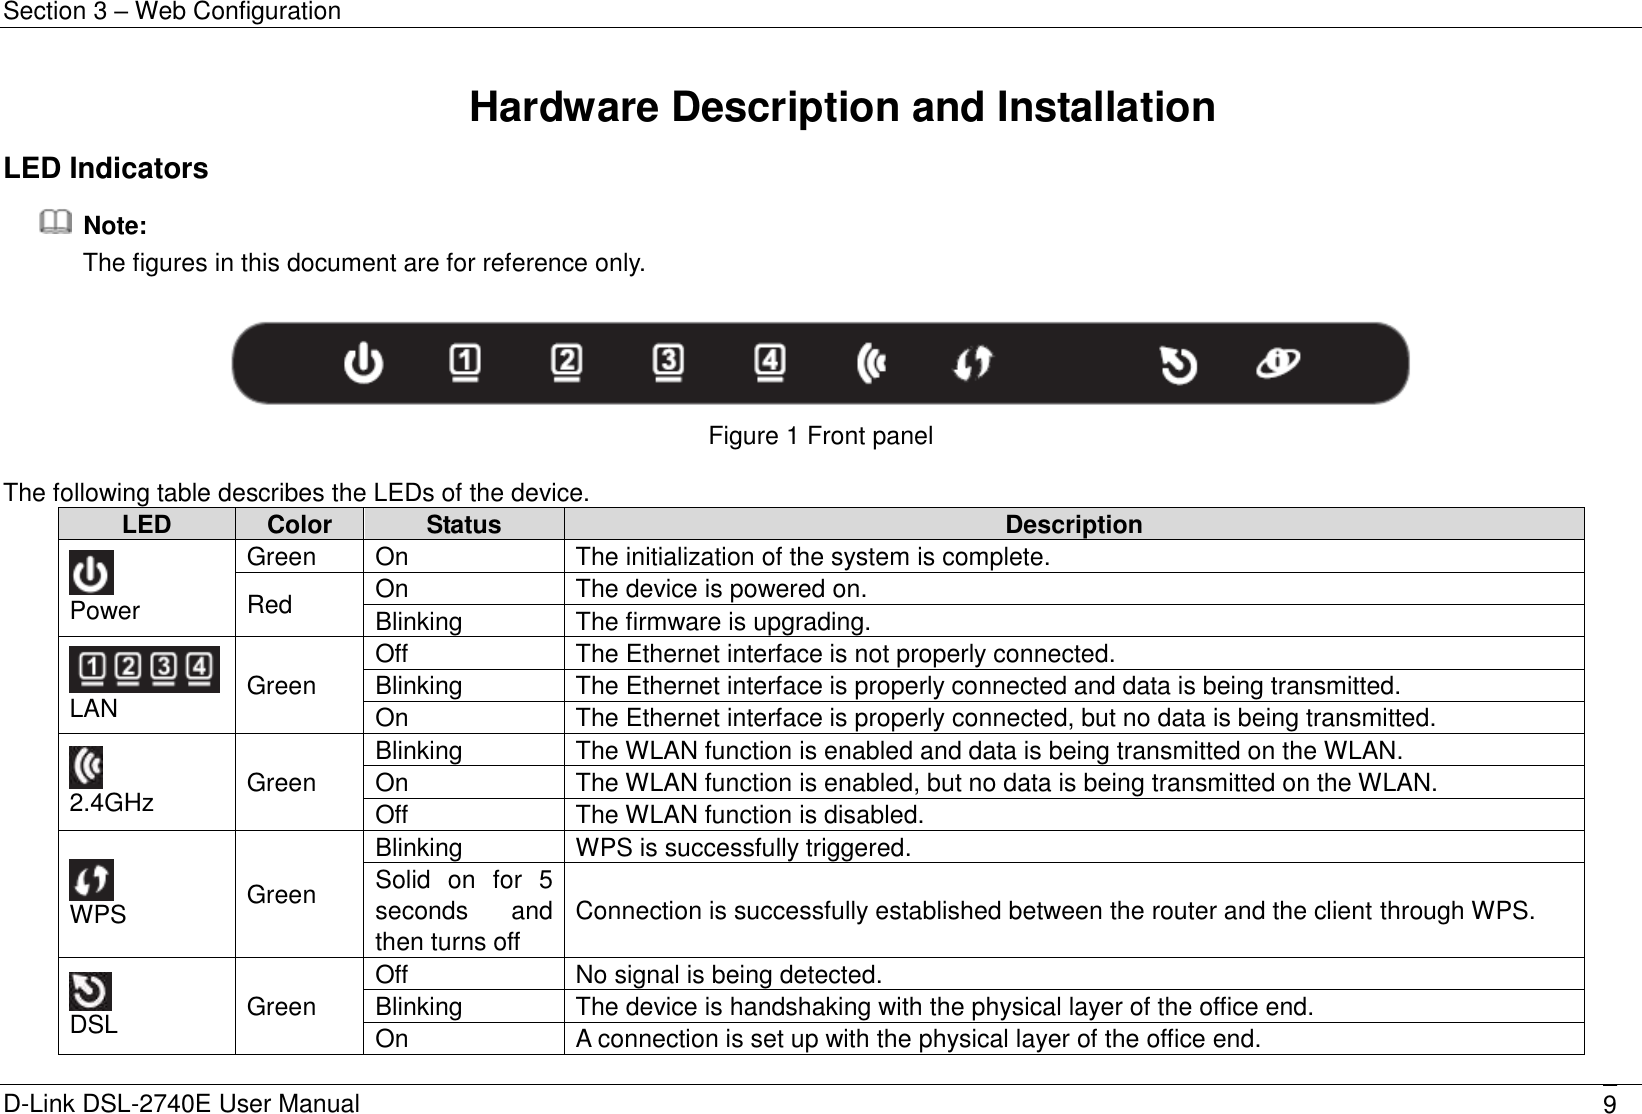 Section 3 – Web Configuration D-Link DSL-2740E User Manual 9 Hardware Description and Installation LED Indicators   Note: The figures in this document are for reference only.  Figure 1 Front panel  The following table describes the LEDs of the device. LED Color Status Description  Power Green On The initialization of the system is complete. Red On The device is powered on. Blinking The firmware is upgrading.  LAN Green Off The Ethernet interface is not properly connected. Blinking The Ethernet interface is properly connected and data is being transmitted. On The Ethernet interface is properly connected, but no data is being transmitted.    2.4GHz Green Blinking The WLAN function is enabled and data is being transmitted on the WLAN. On The WLAN function is enabled, but no data is being transmitted on the WLAN. Off The WLAN function is disabled.  WPS Green Blinking WPS is successfully triggered. Solid  on  for  5 seconds  and then turns off Connection is successfully established between the router and the client through WPS.      DSL Green Off No signal is being detected. Blinking The device is handshaking with the physical layer of the office end. On A connection is set up with the physical layer of the office end. 